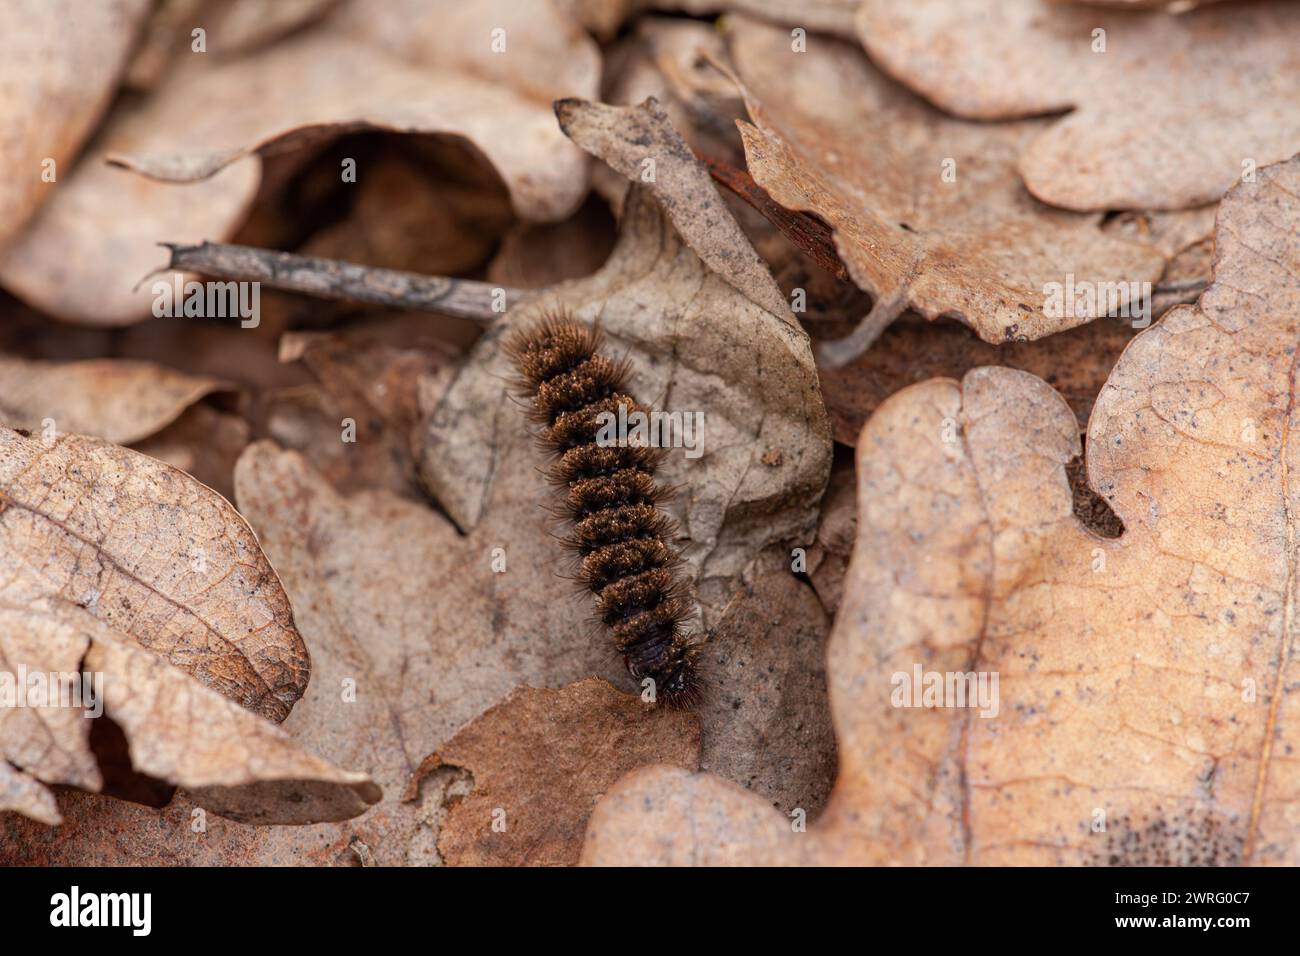 A caterpillar is crawling on a pile of leaves, blending in with the natural material. The closeup view shows the terrestrial animals intricate pattern Stock Photo